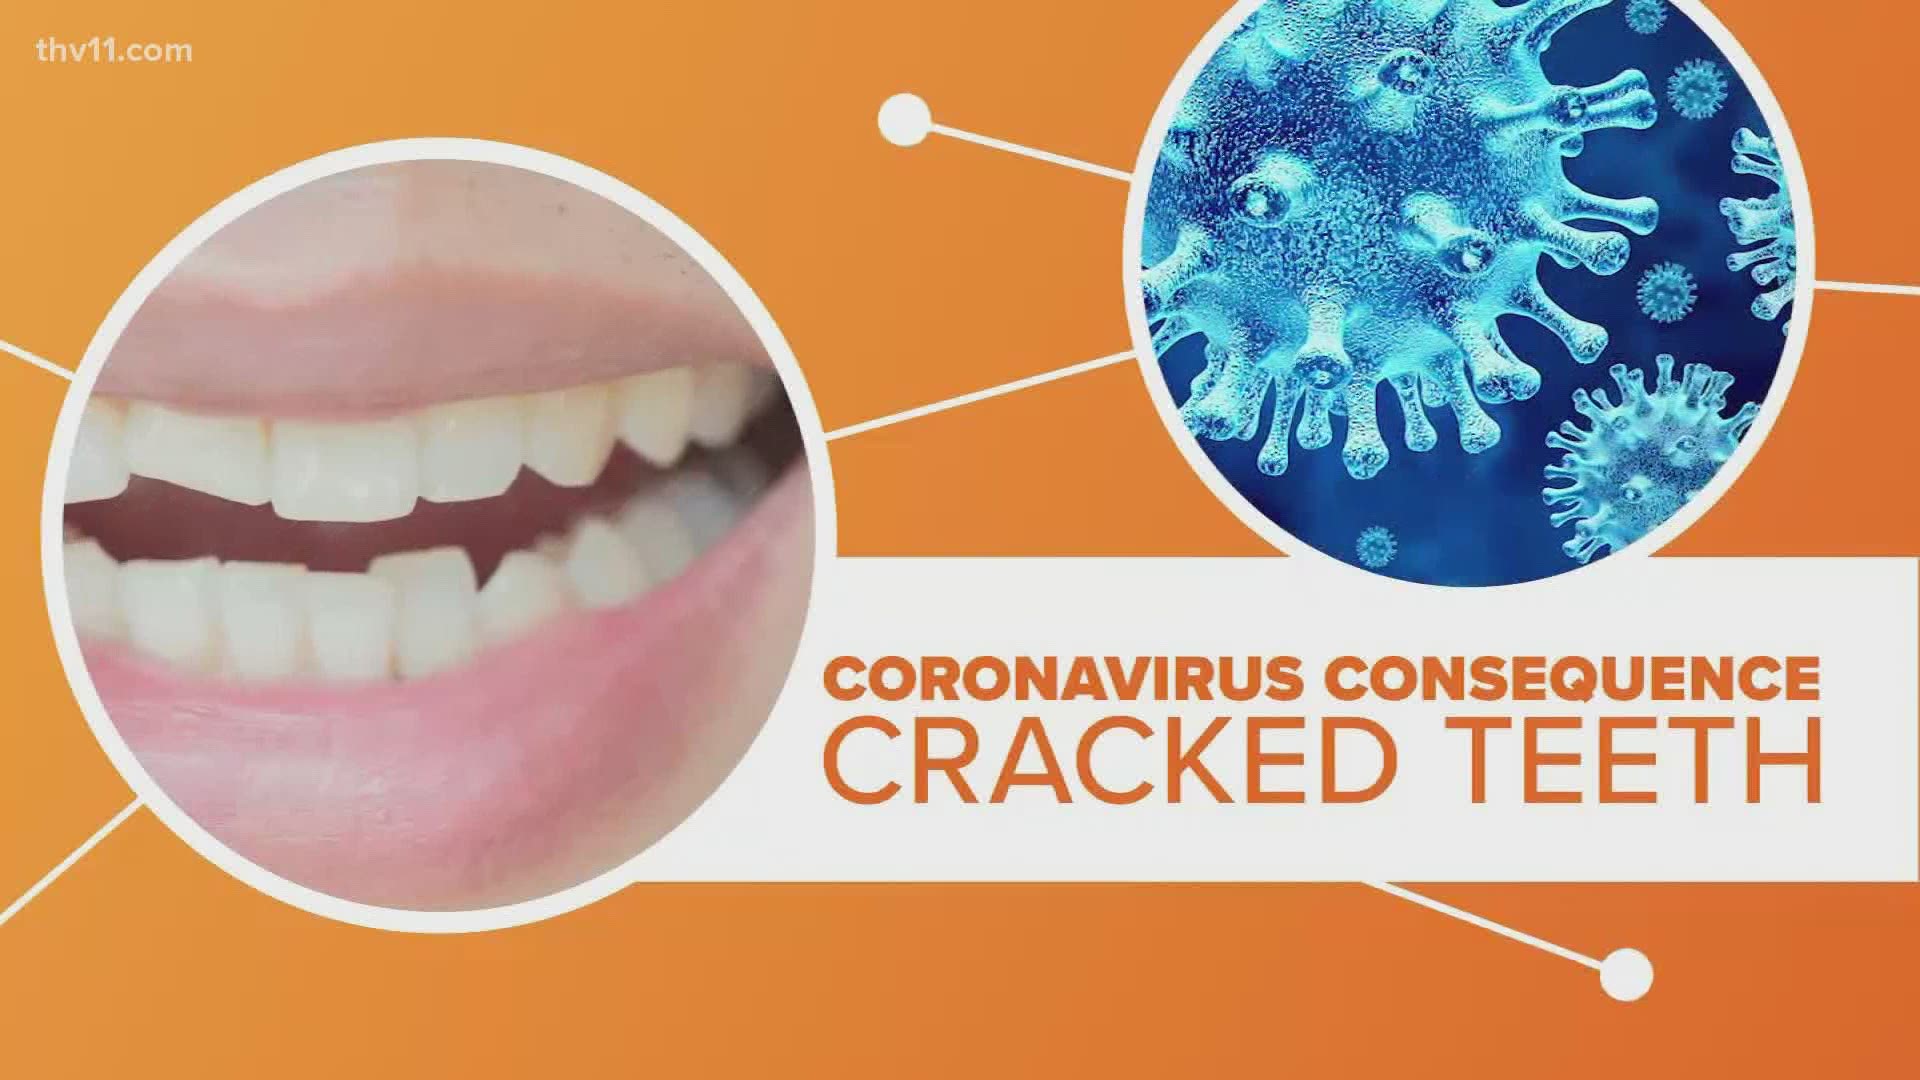 Doctors are now making some strange discoveries about COVID-19 and it's happening with our teeth.